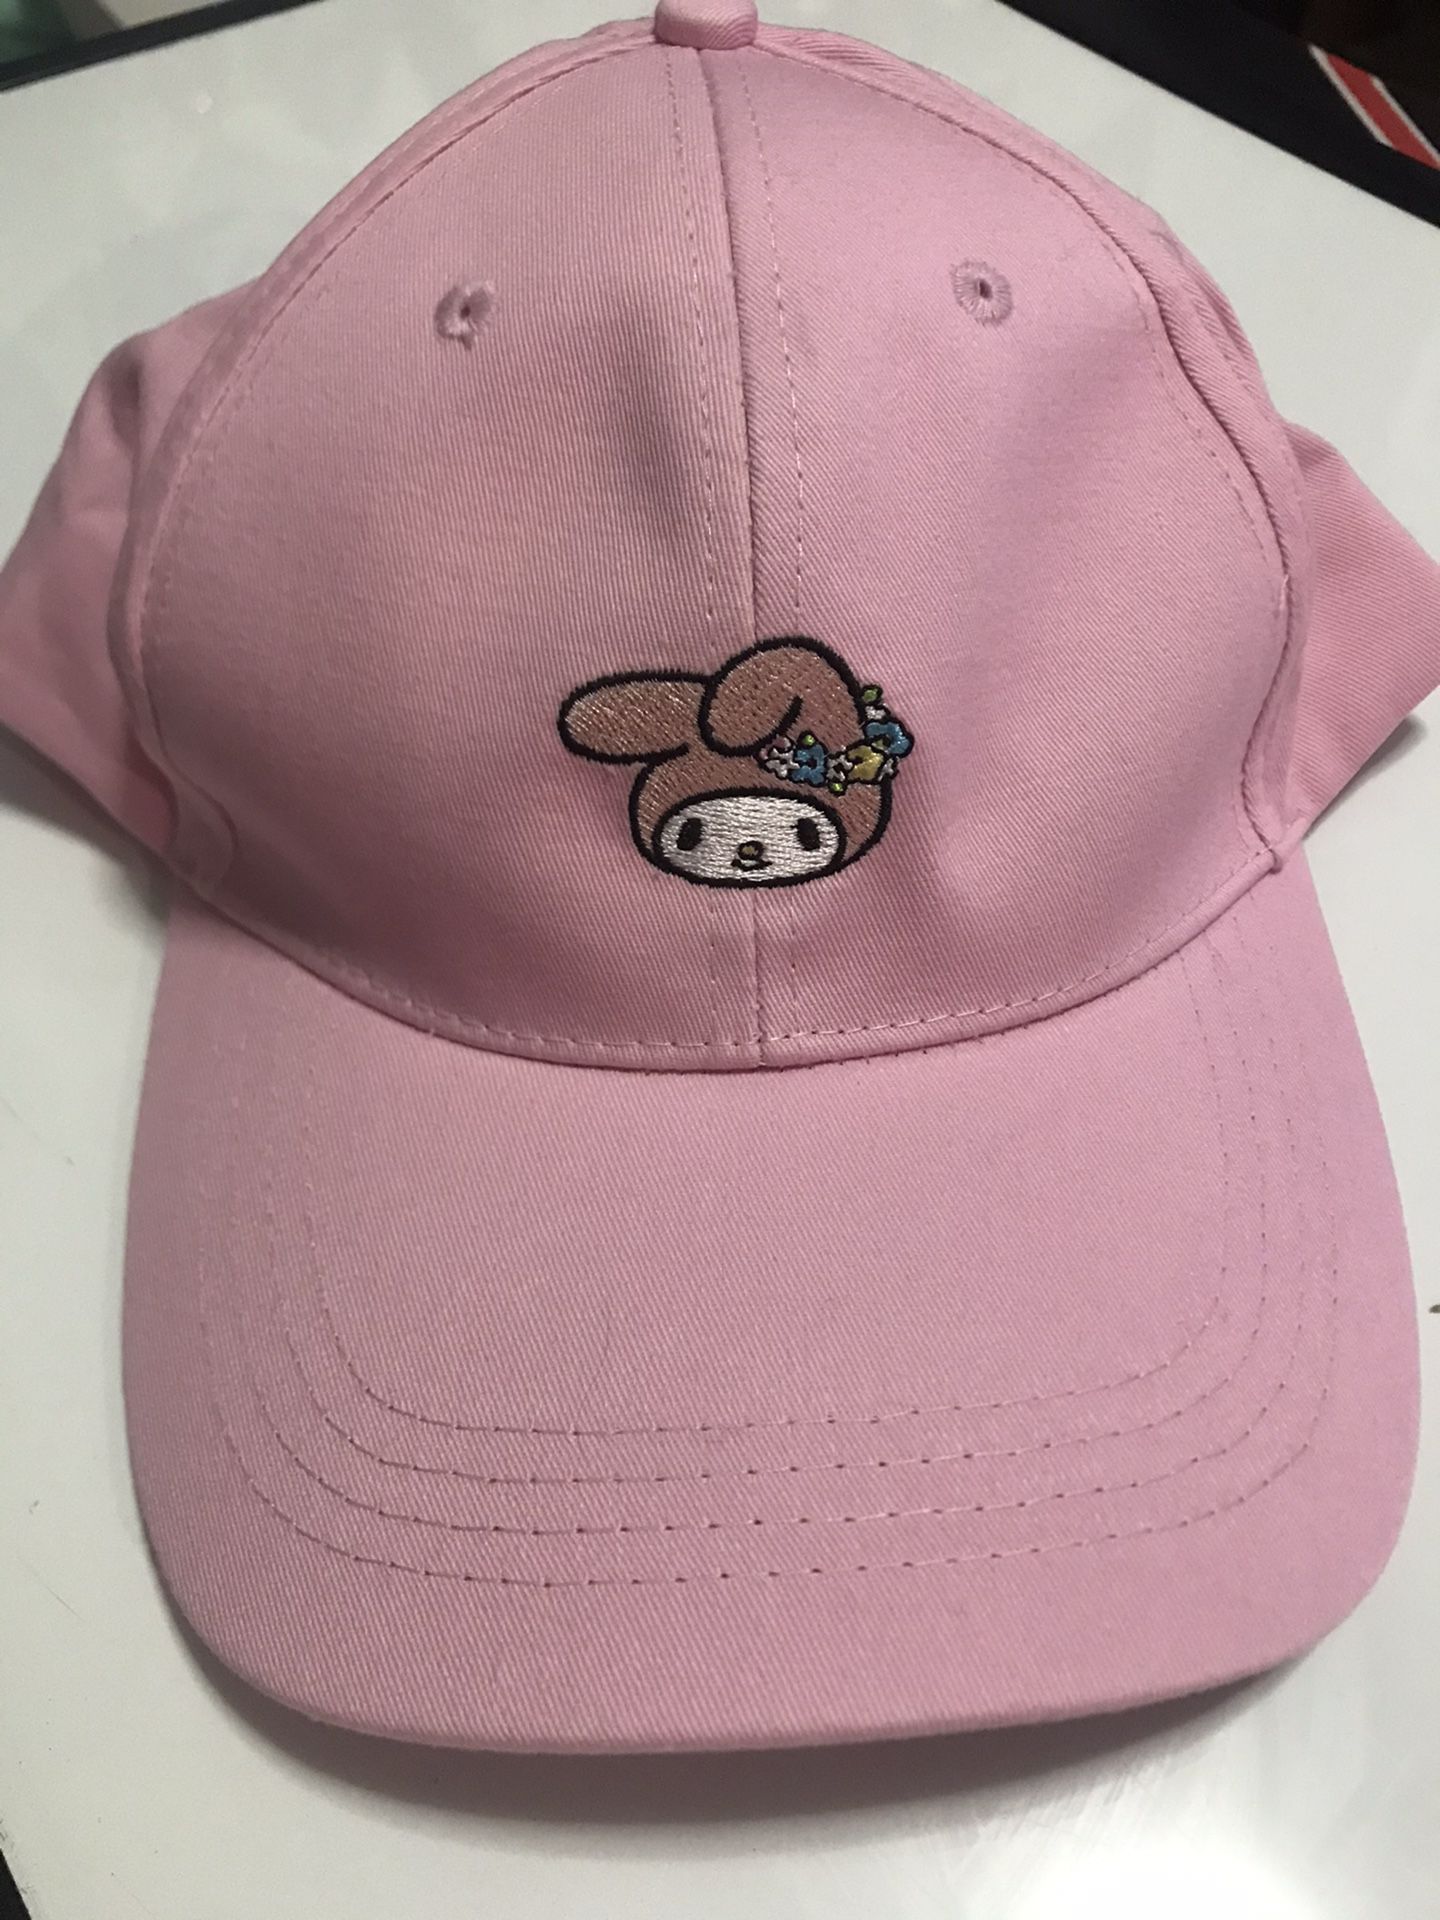 Sanrio my melody pink hat